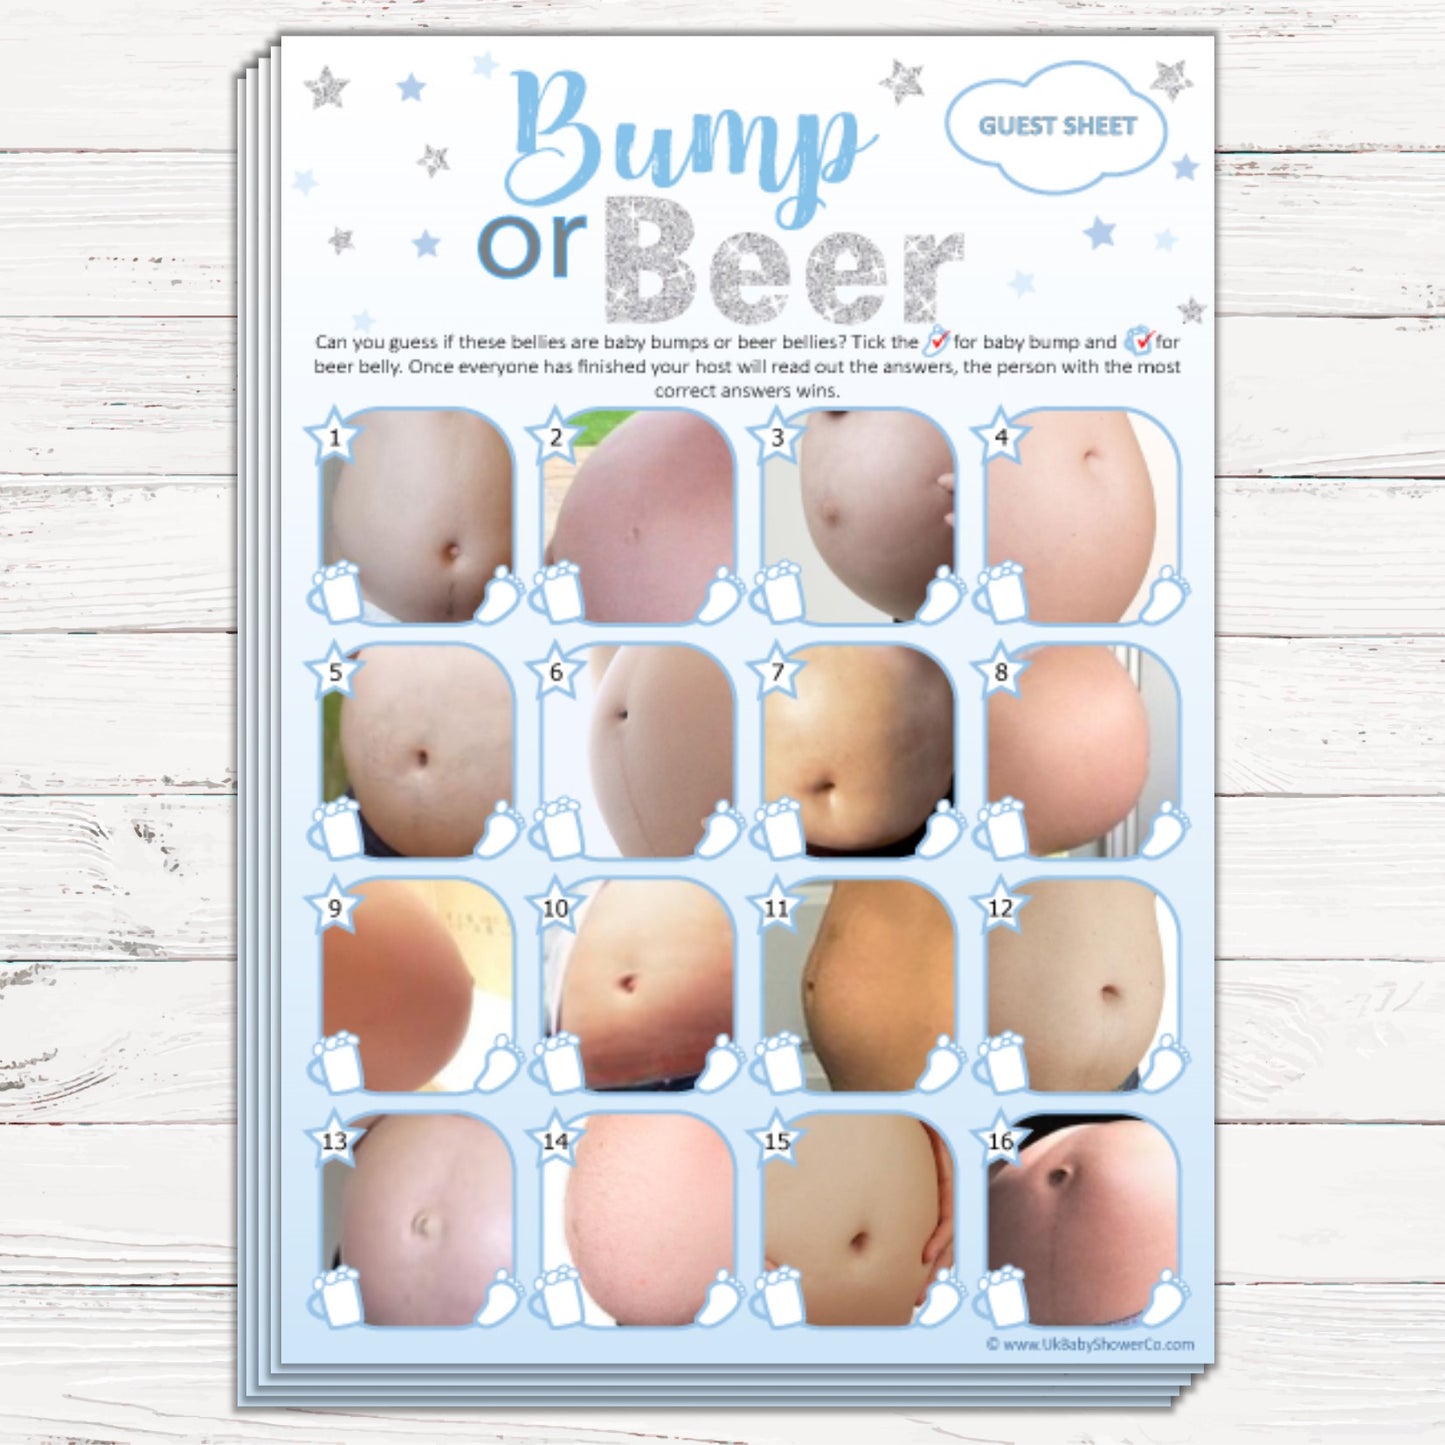 Bump or Beer Party Game - Uk Baby Shower Co ltd